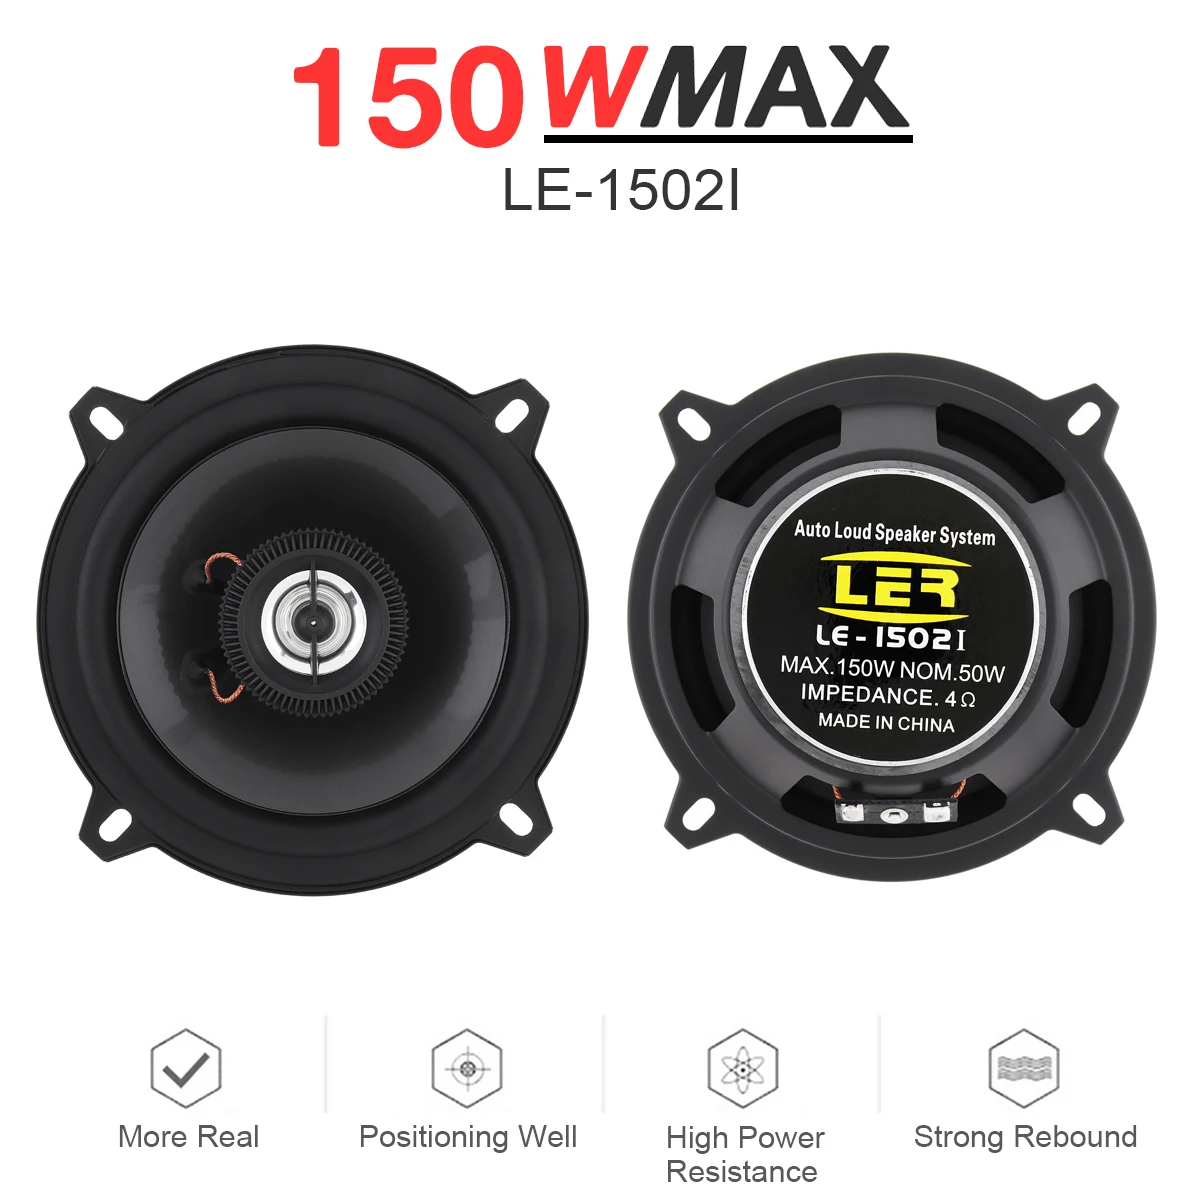 2pcs 5 Inch 2 Way Universal Car Coaxial Speakers Audio Stereo Full Range Frequency HiFi for Auto Stereo Modified 2pcs 4 inch universal 2 way car coaxial speakers audio stereo full range frequency hifi speaker non destructive